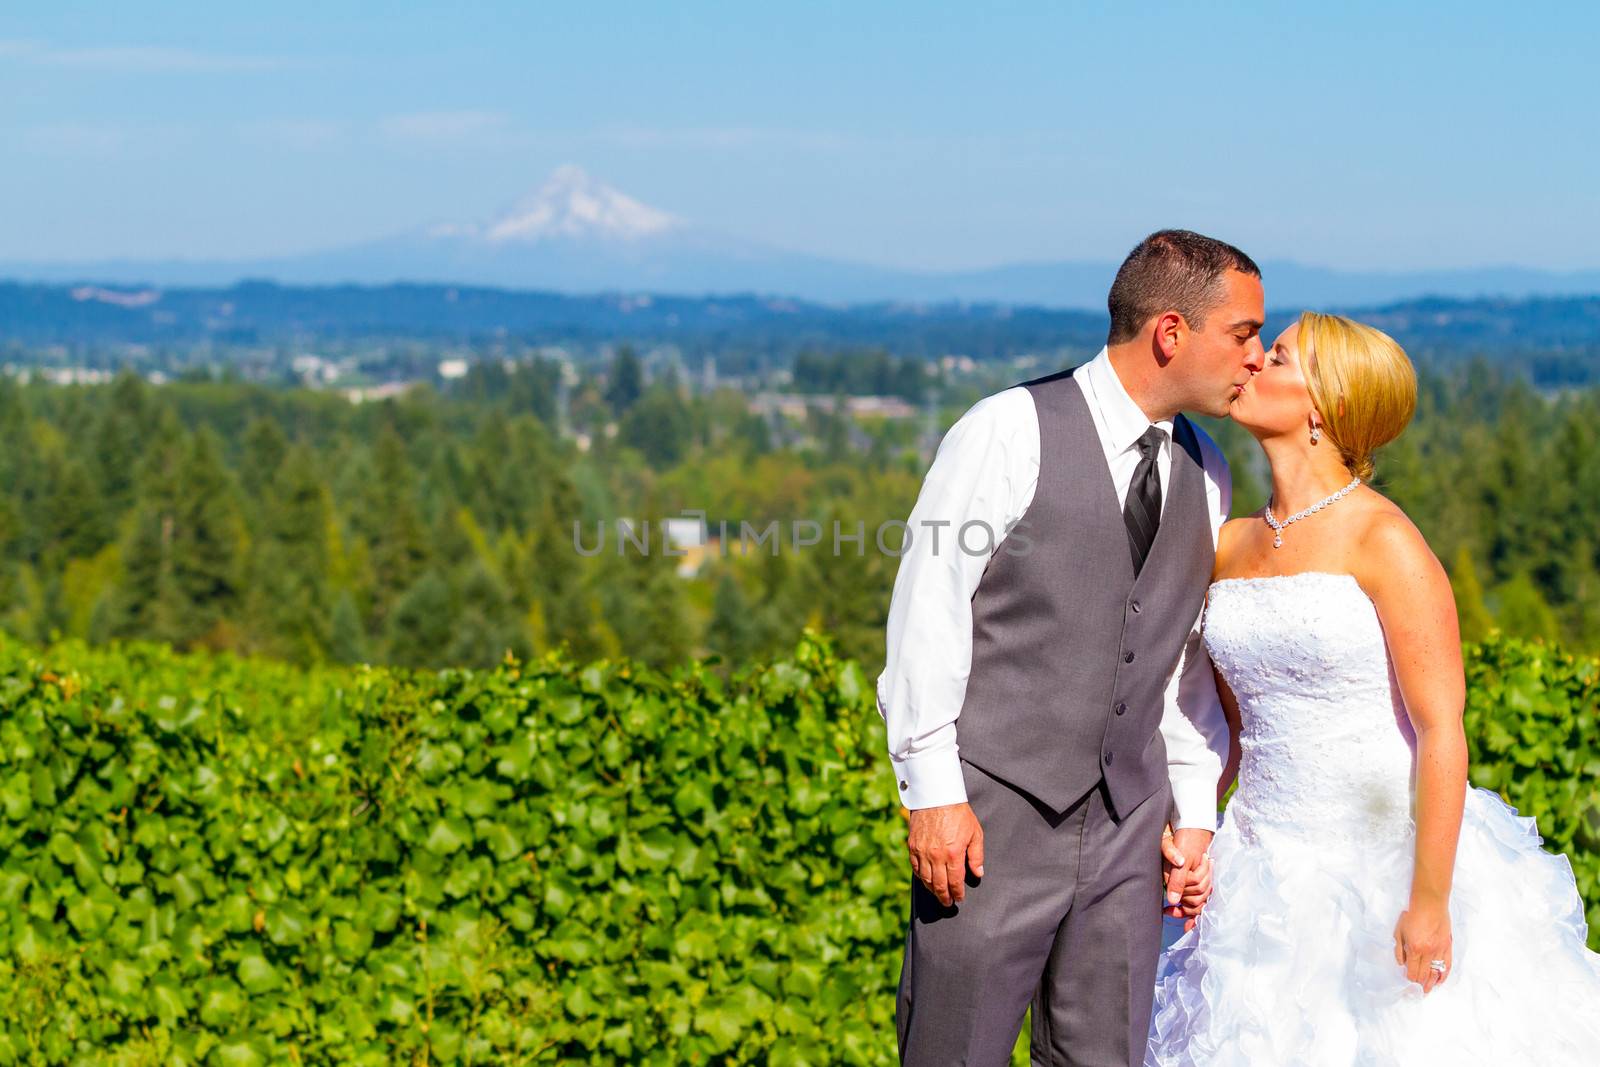 Bride and Groom with Fabulous View by joshuaraineyphotography